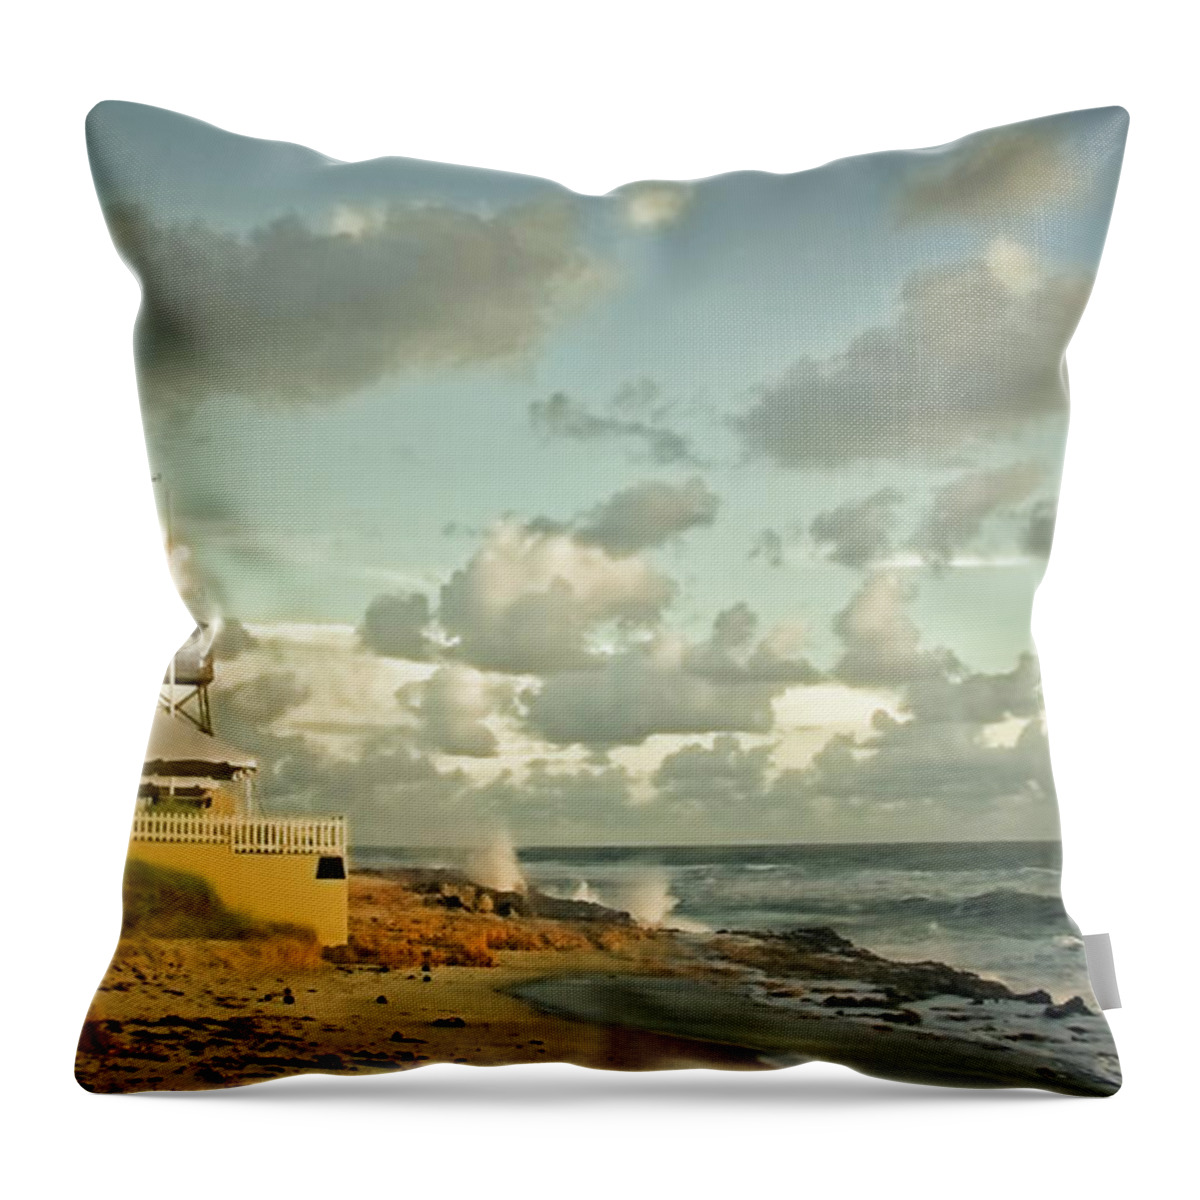 Florida Throw Pillow featuring the photograph House Of Refuge by Steve DaPonte